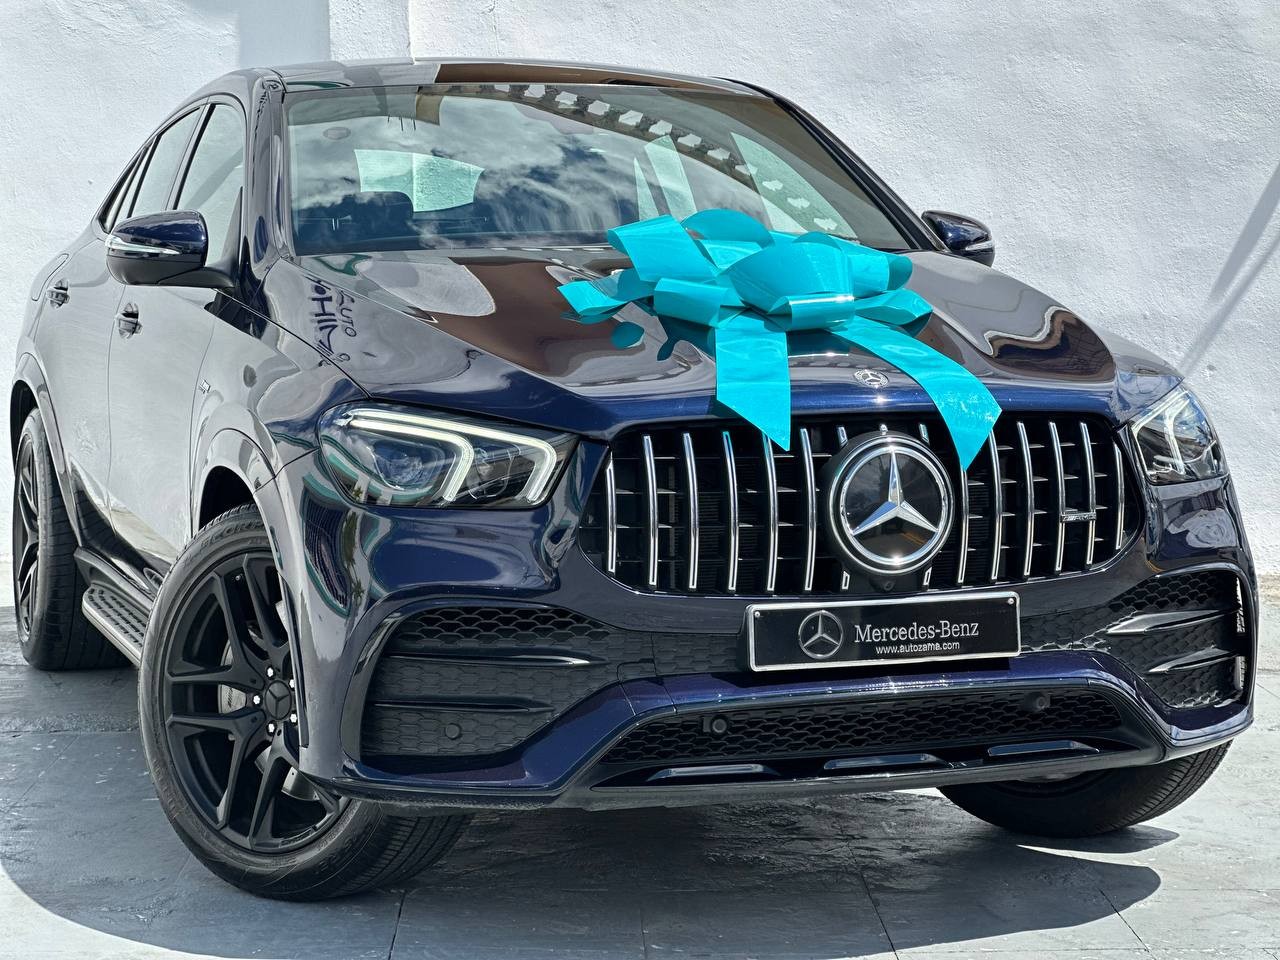 jeepetas y camionetas - MERCEDES-BENZ CLASE GLE 53 4MATIC COUPE 2020